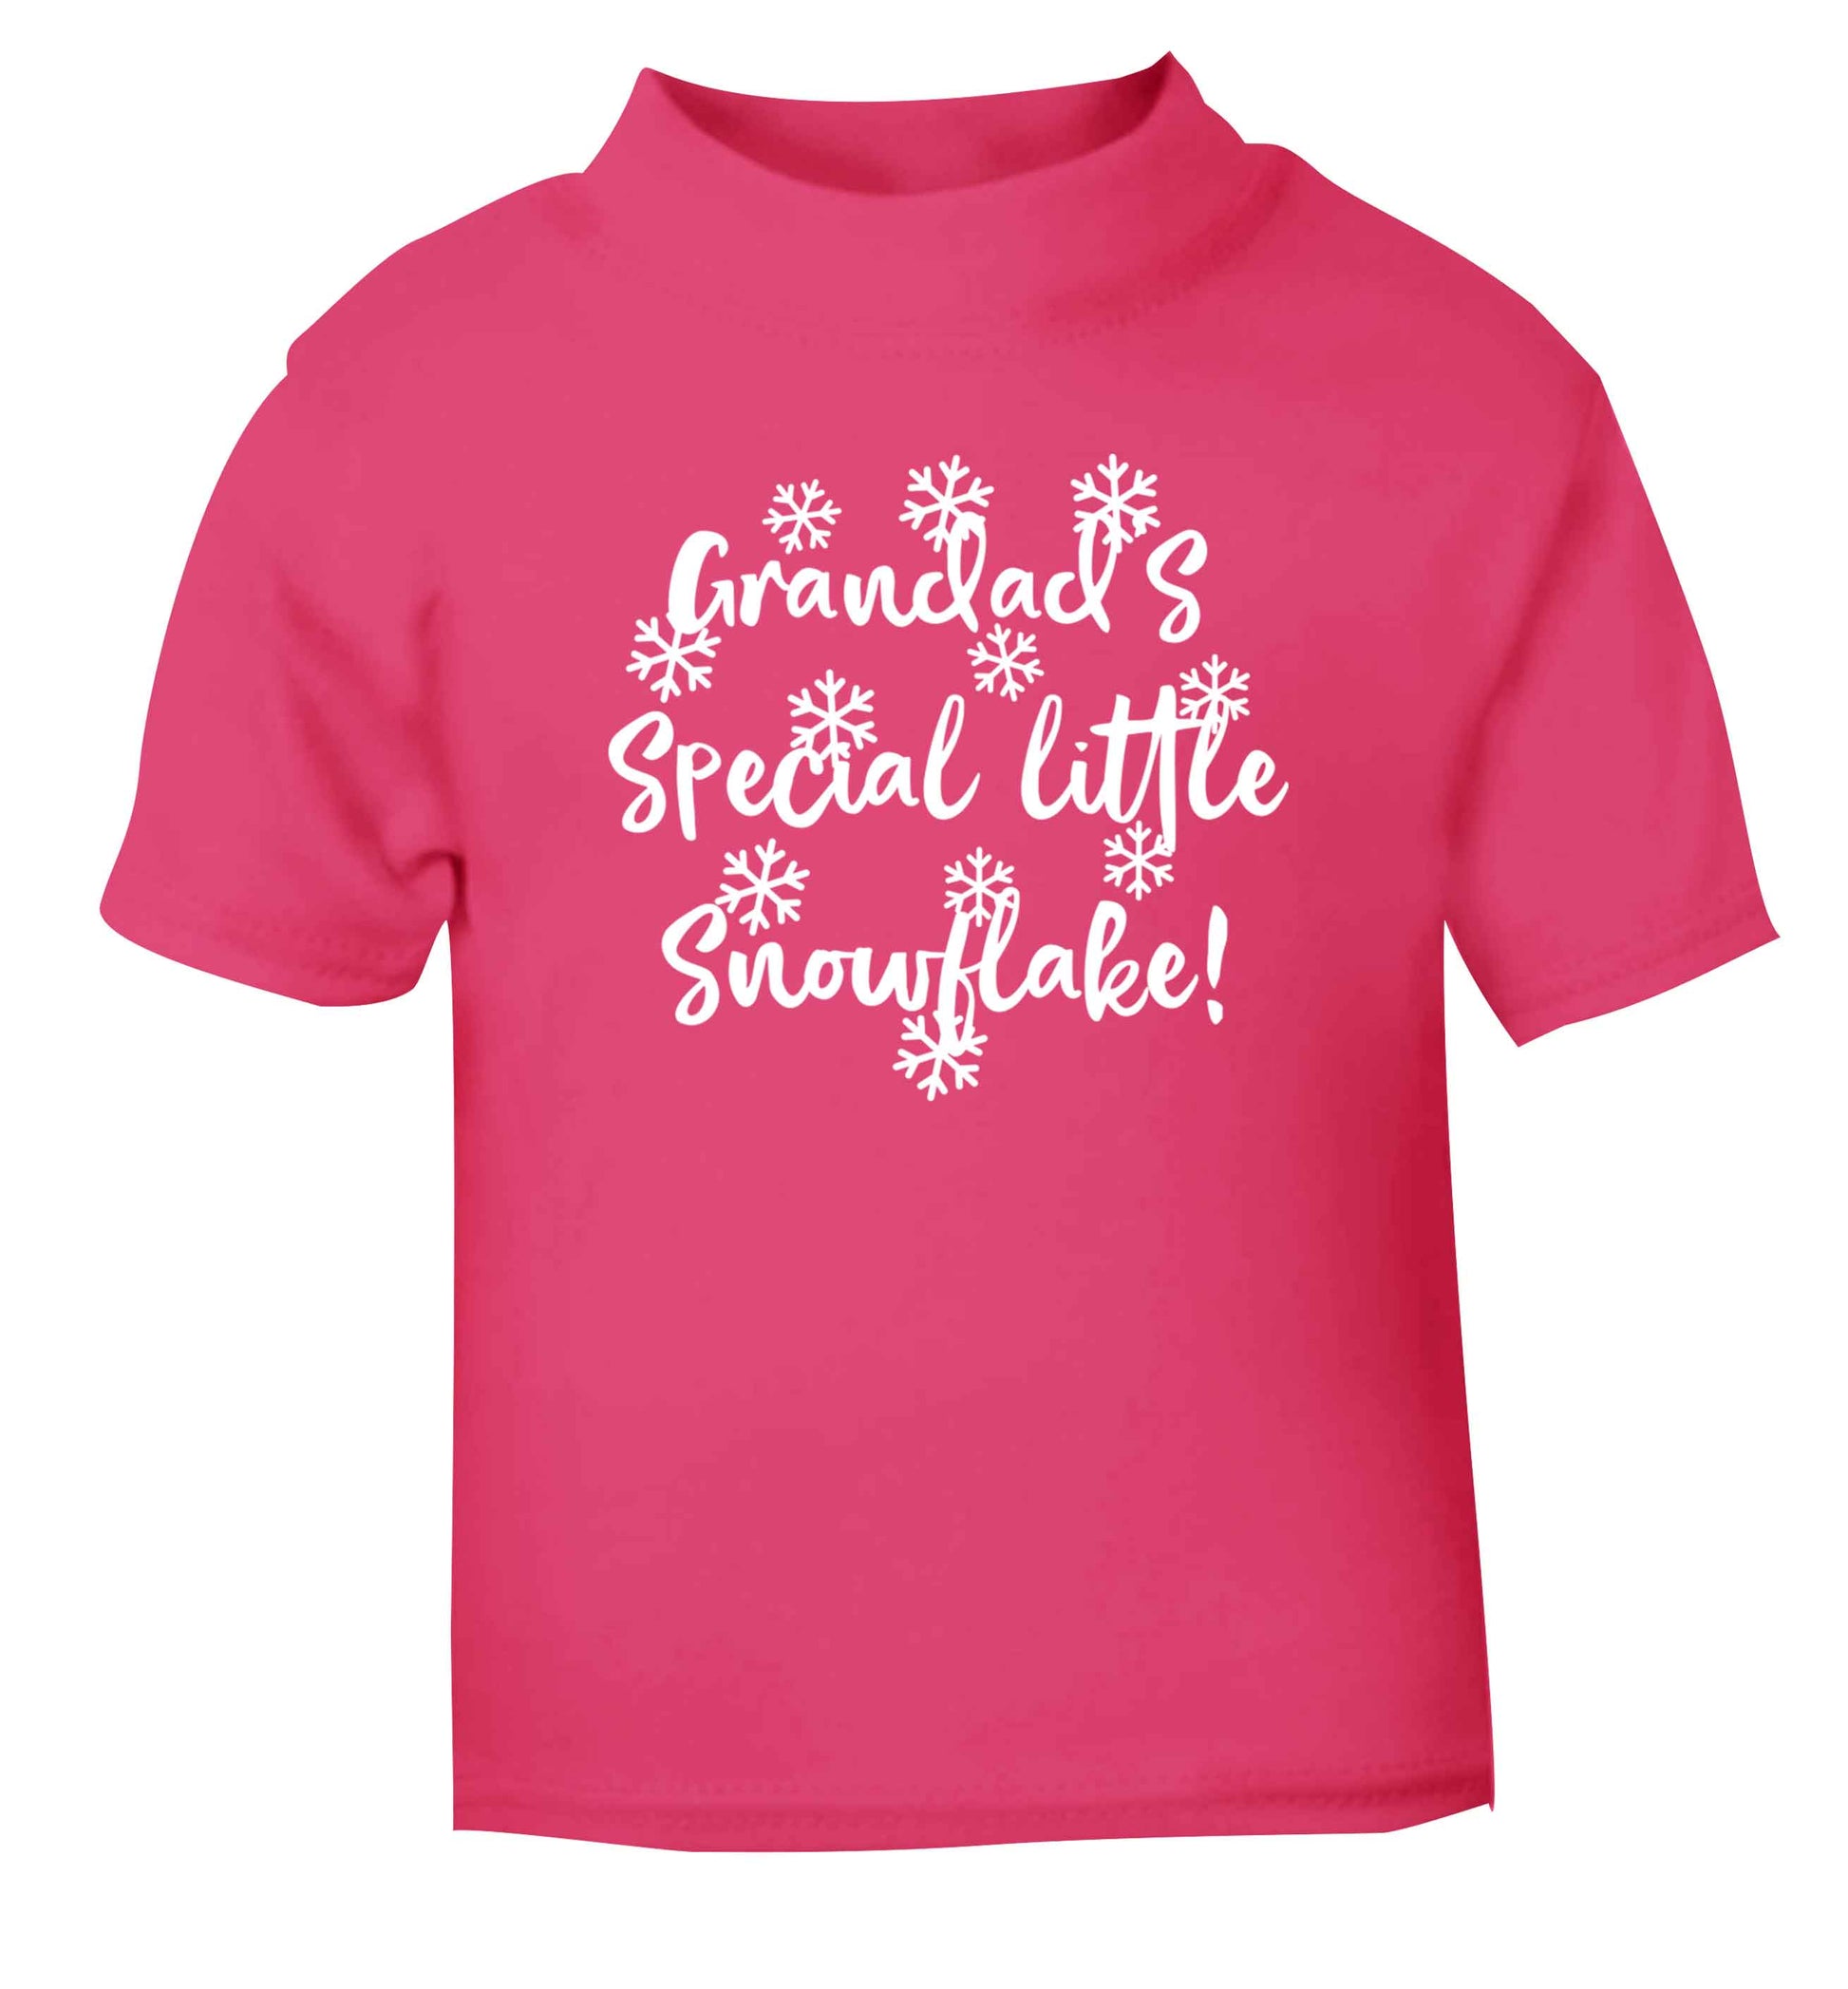 Grandad's special little snowflake pink Baby Toddler Tshirt 2 Years